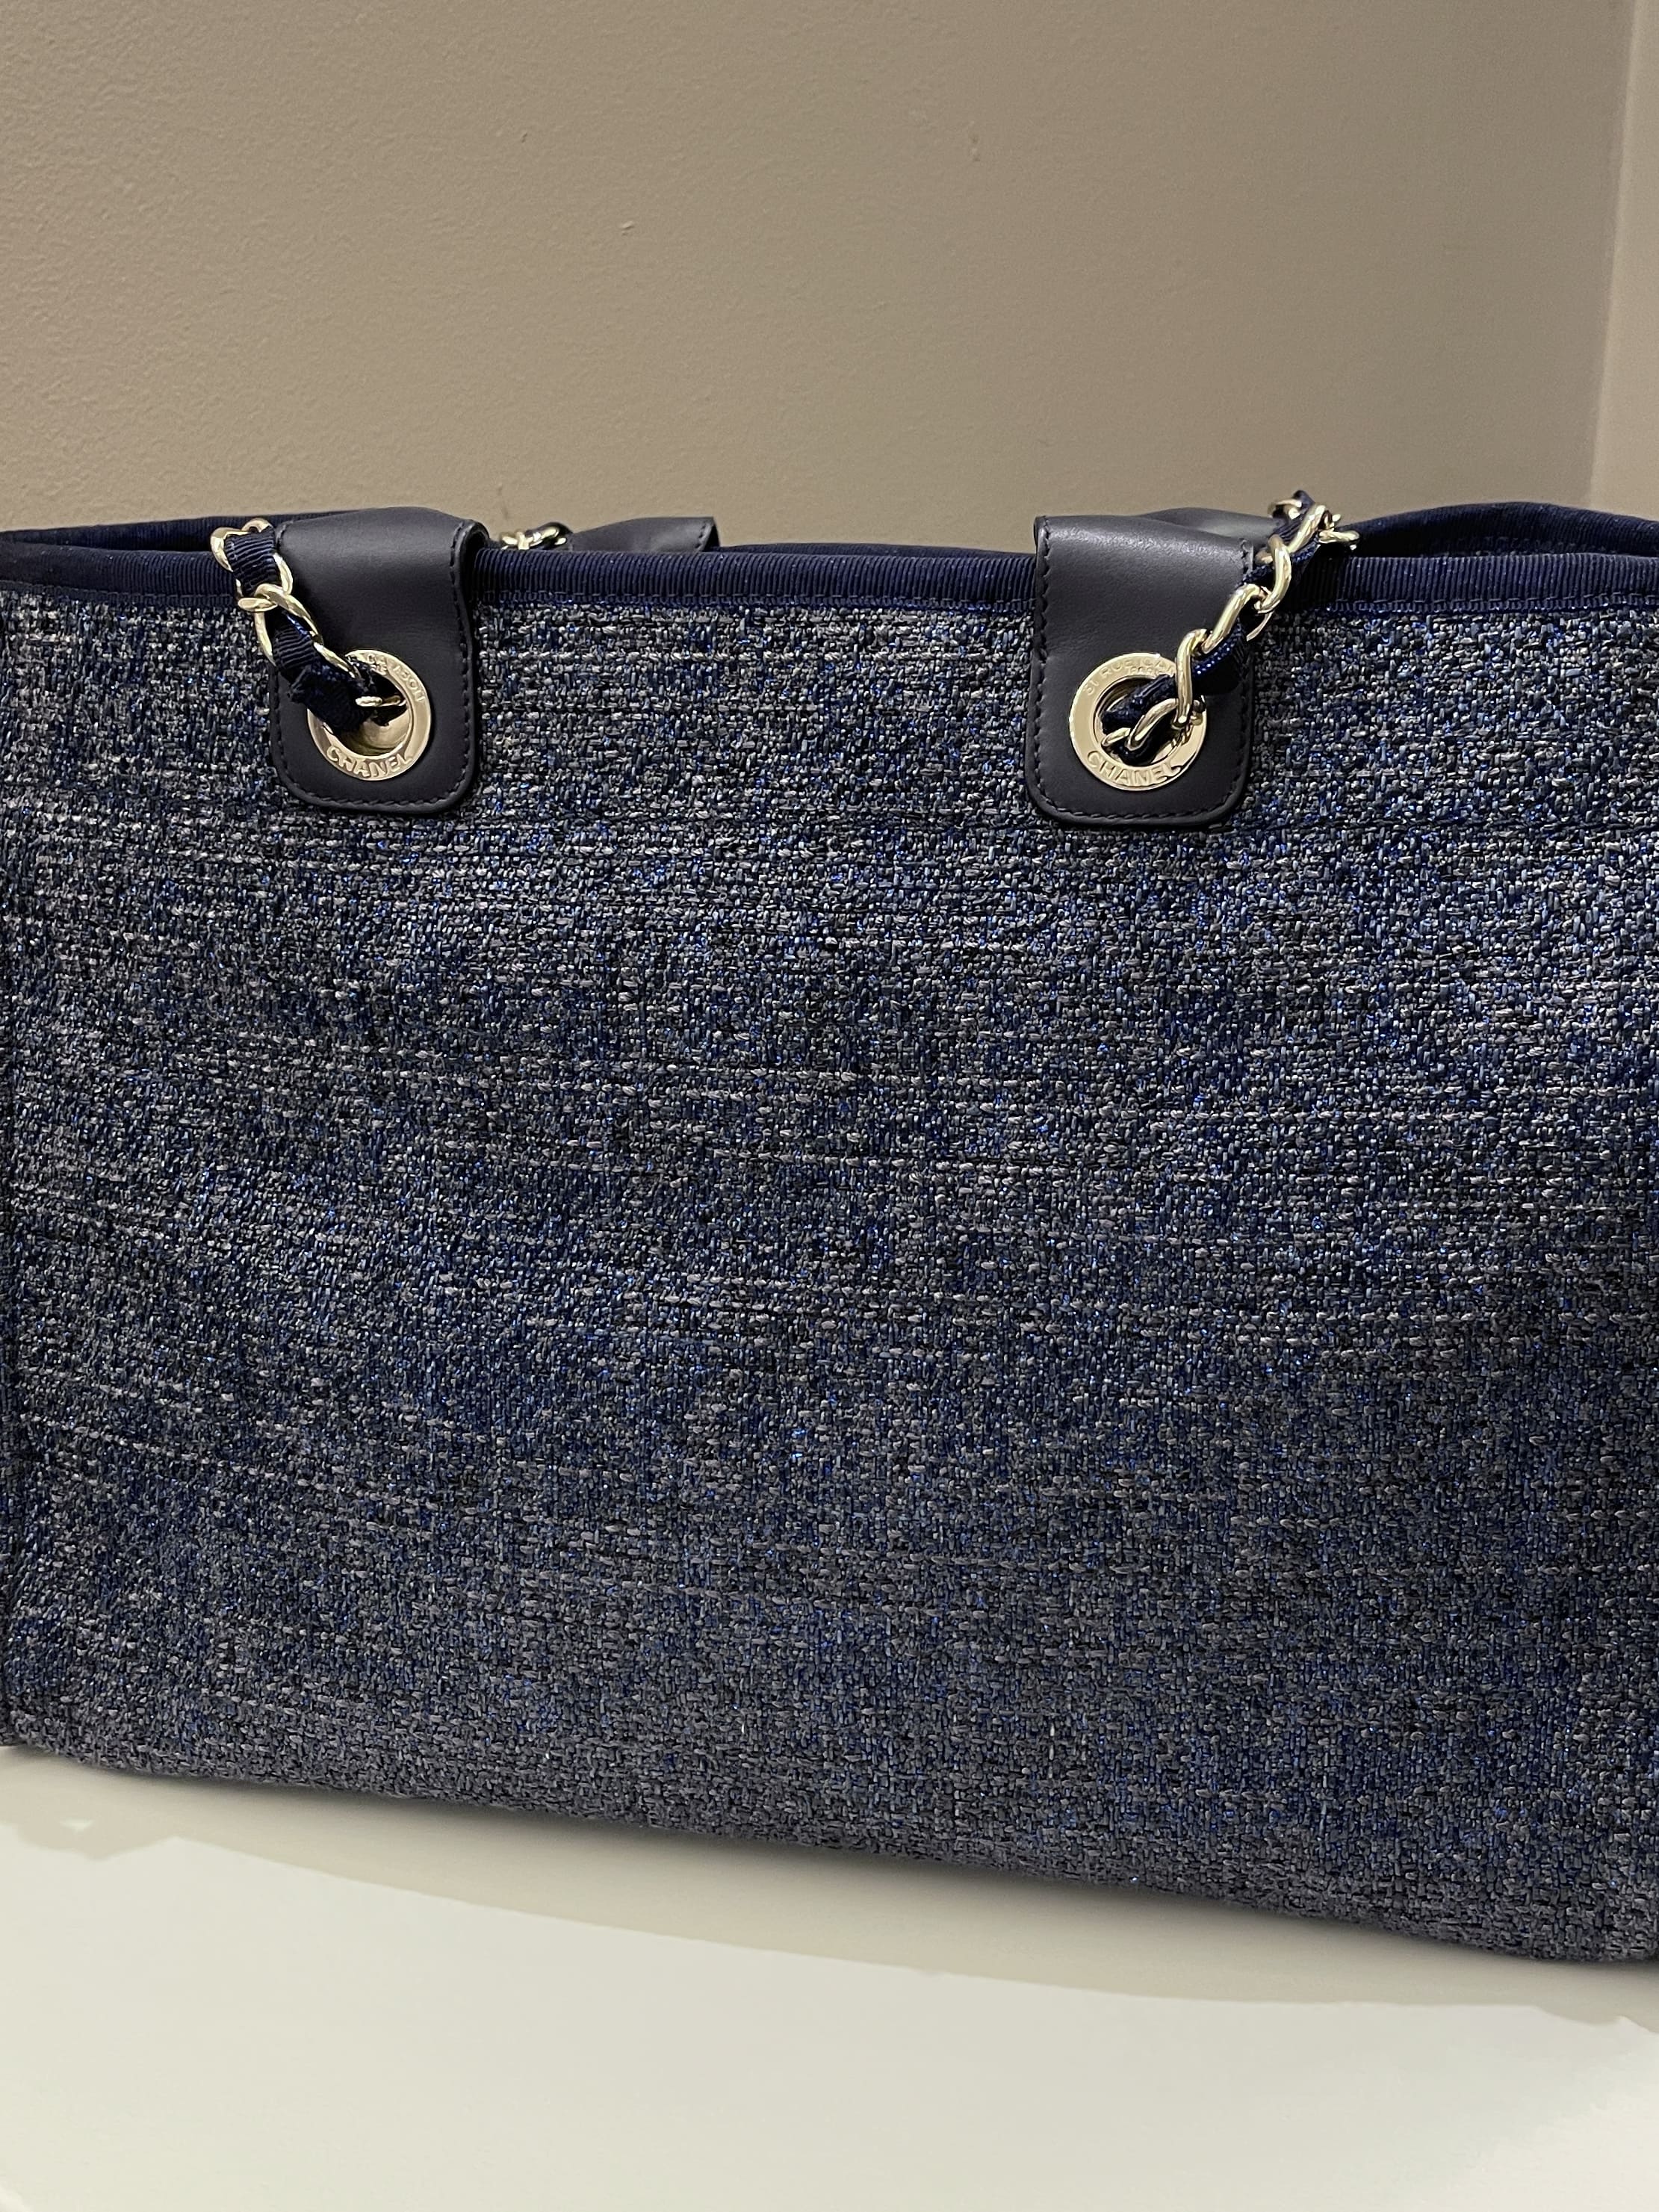 Chanel Deauville Shopper Tote Navy